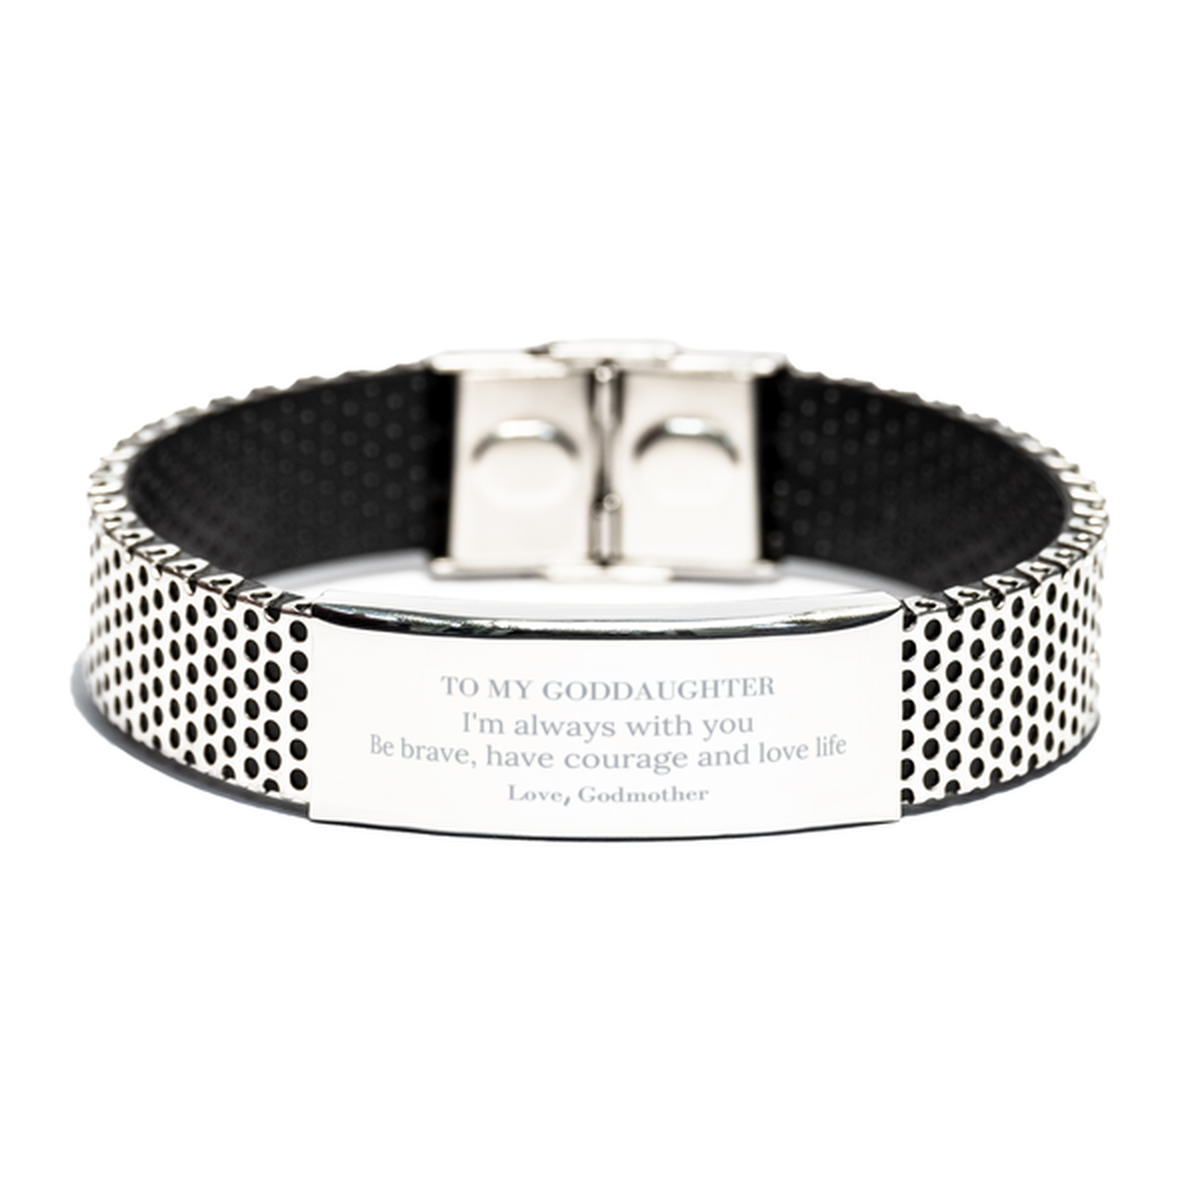 To My Goddaughter Gifts from Godmother, Unique Stainless Steel Bracelet Inspirational Christmas Birthday Graduation Gifts for Goddaughter I'm always with you. Be brave, have courage and love life. Love, Godmother